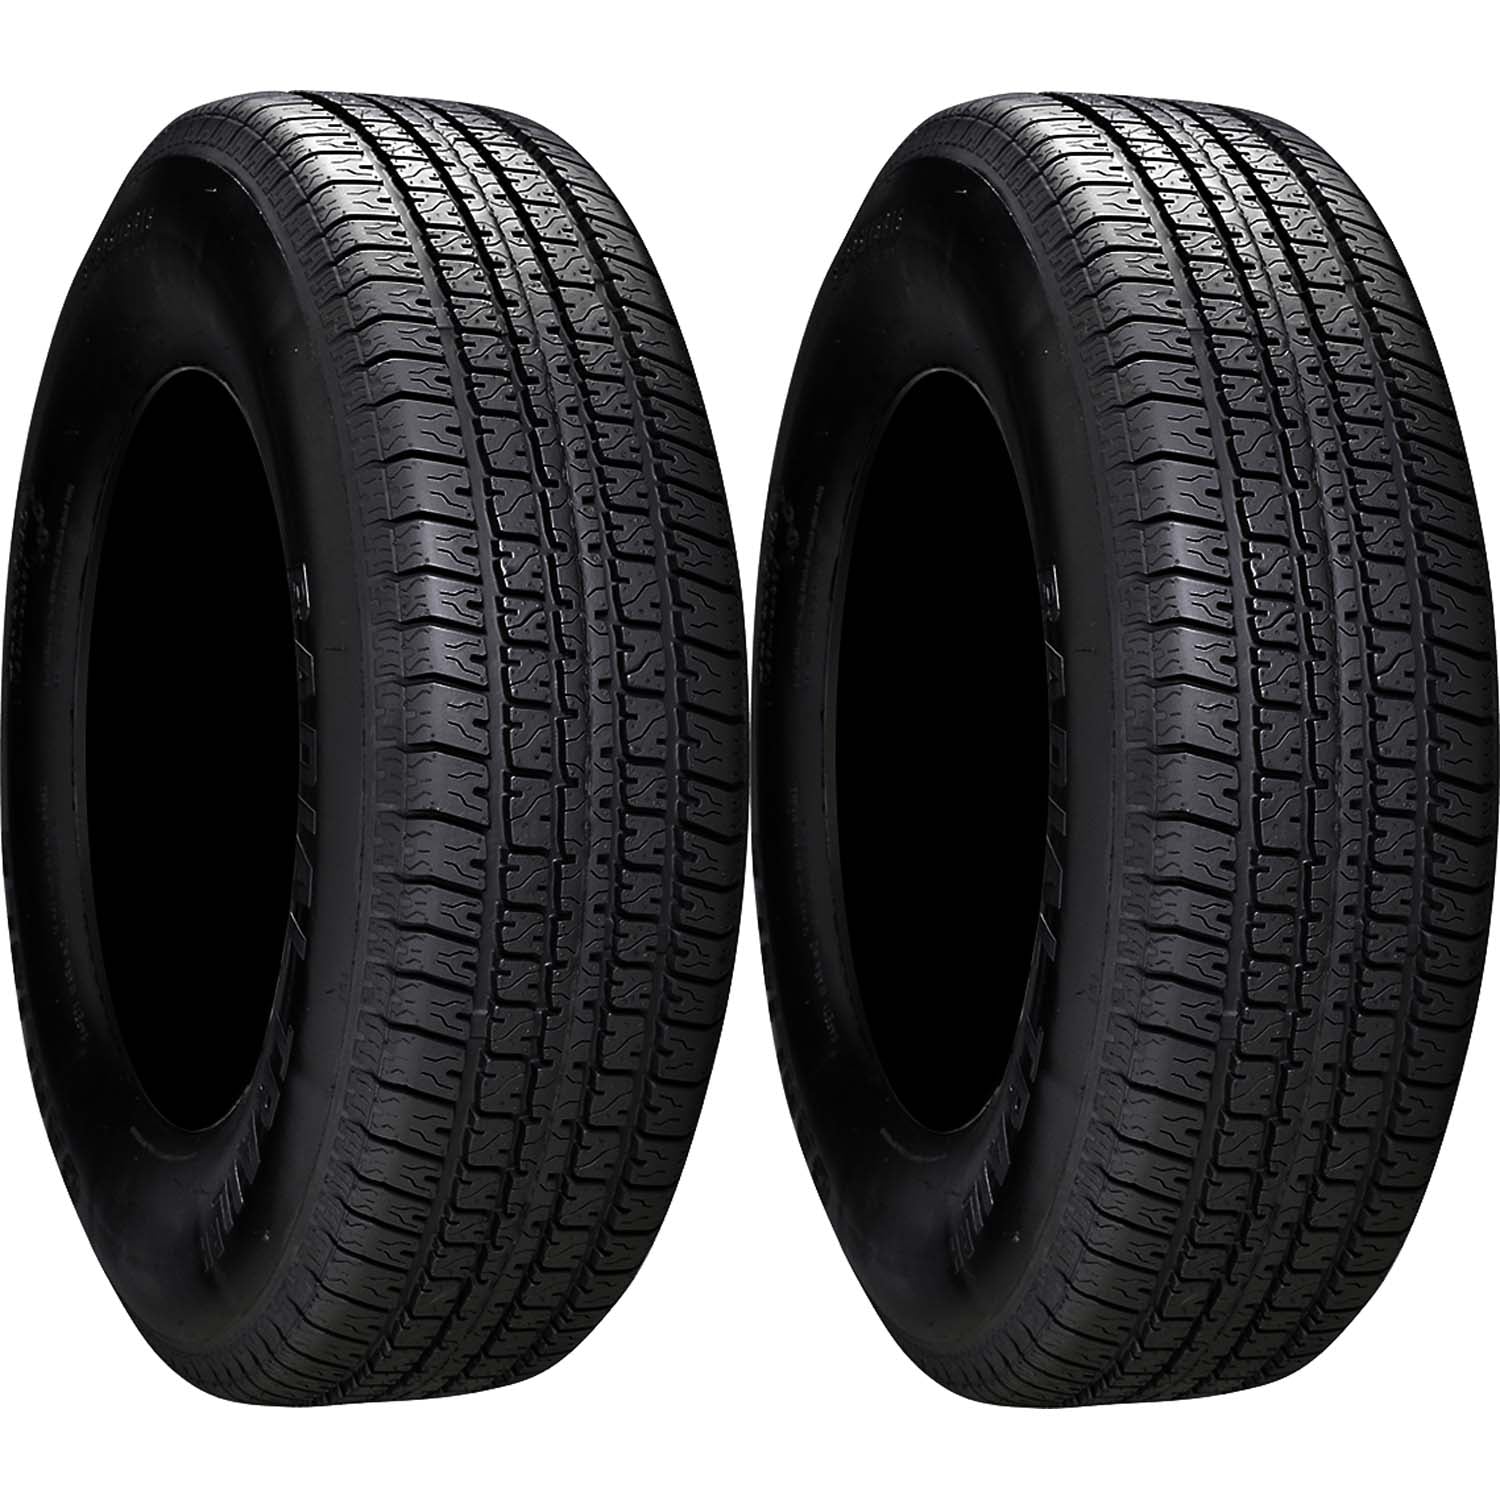 Carlisle Radial Trail RH Trailer Tire LRE 10ply ST145R12 Pack of 2